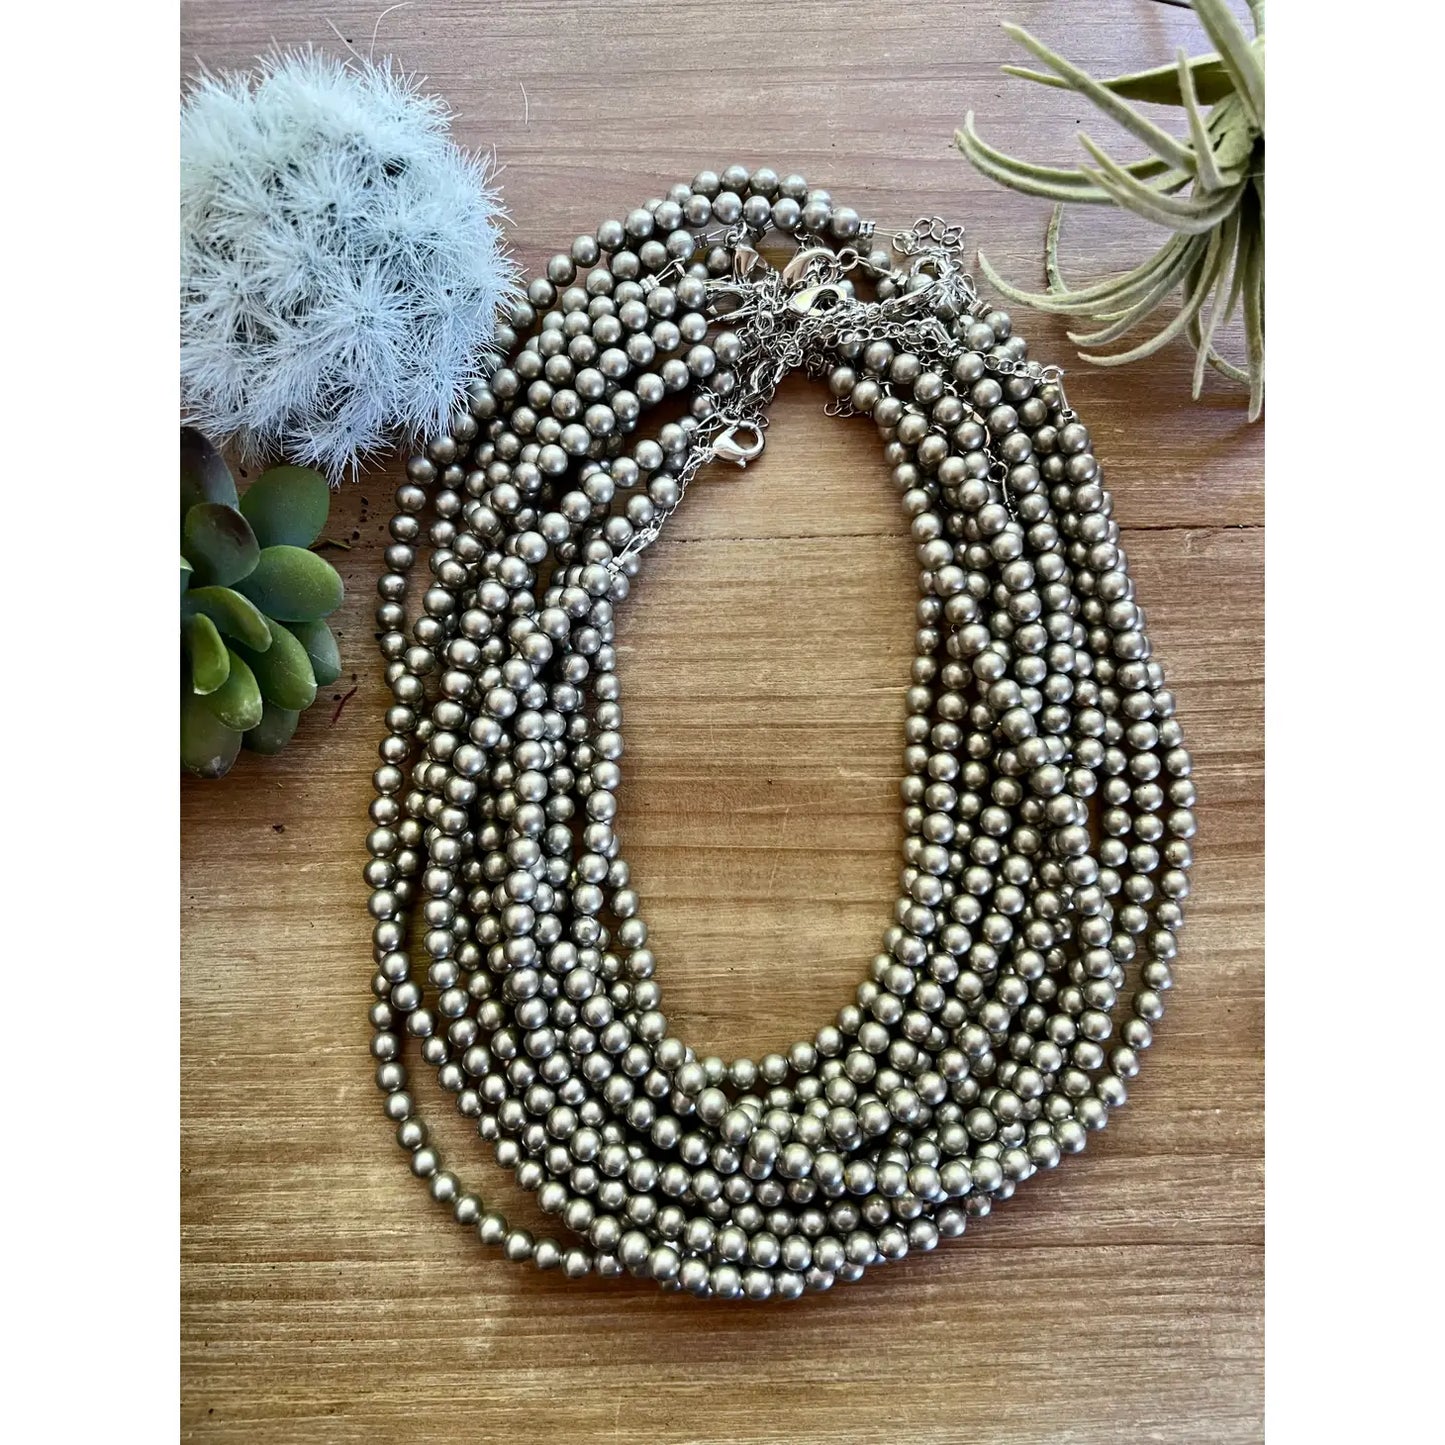 16" Silver Plated Beads